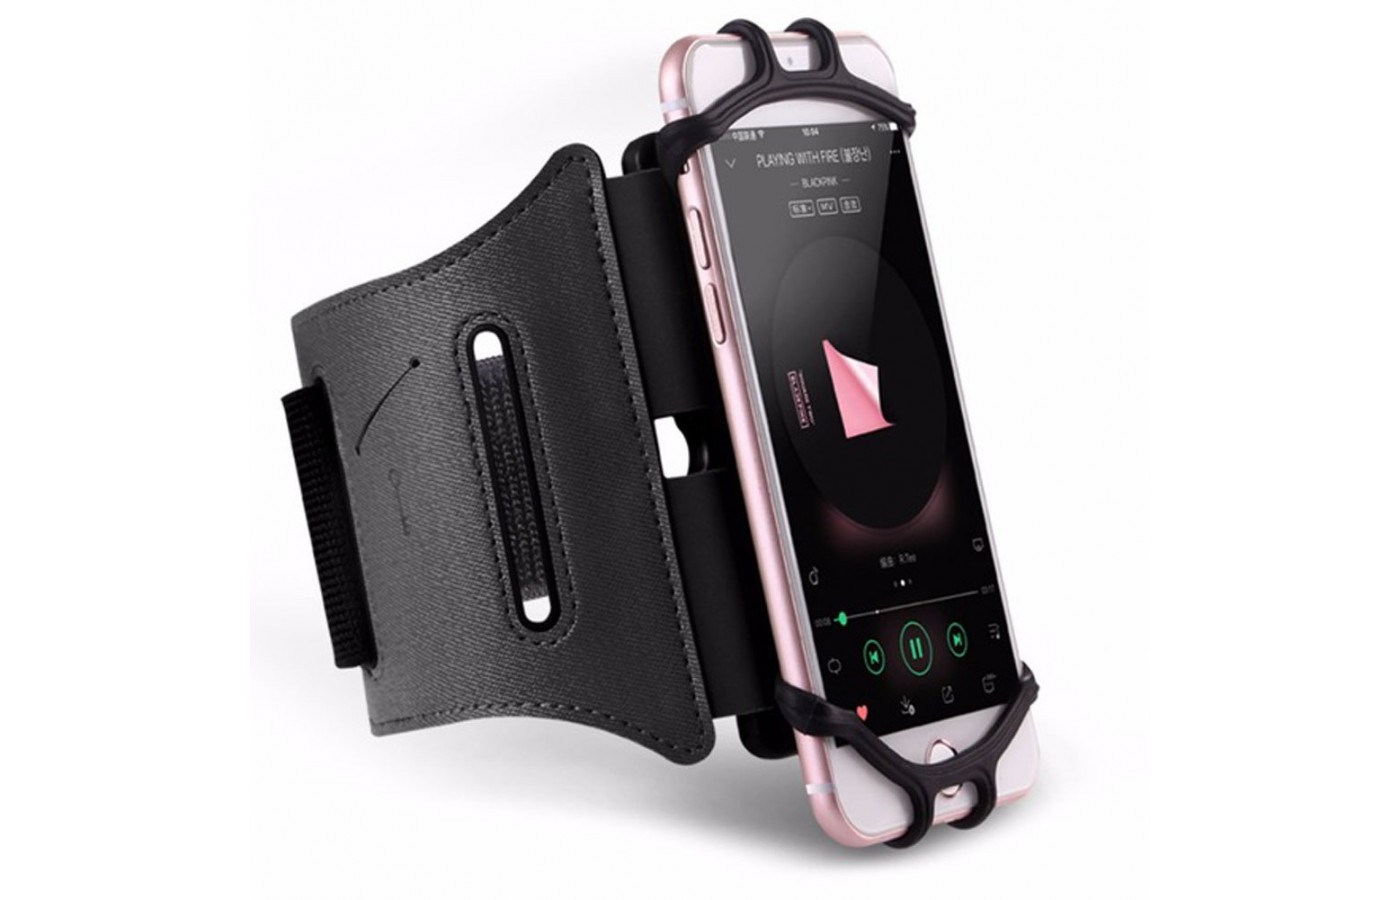 VUP Running Armband feature angle